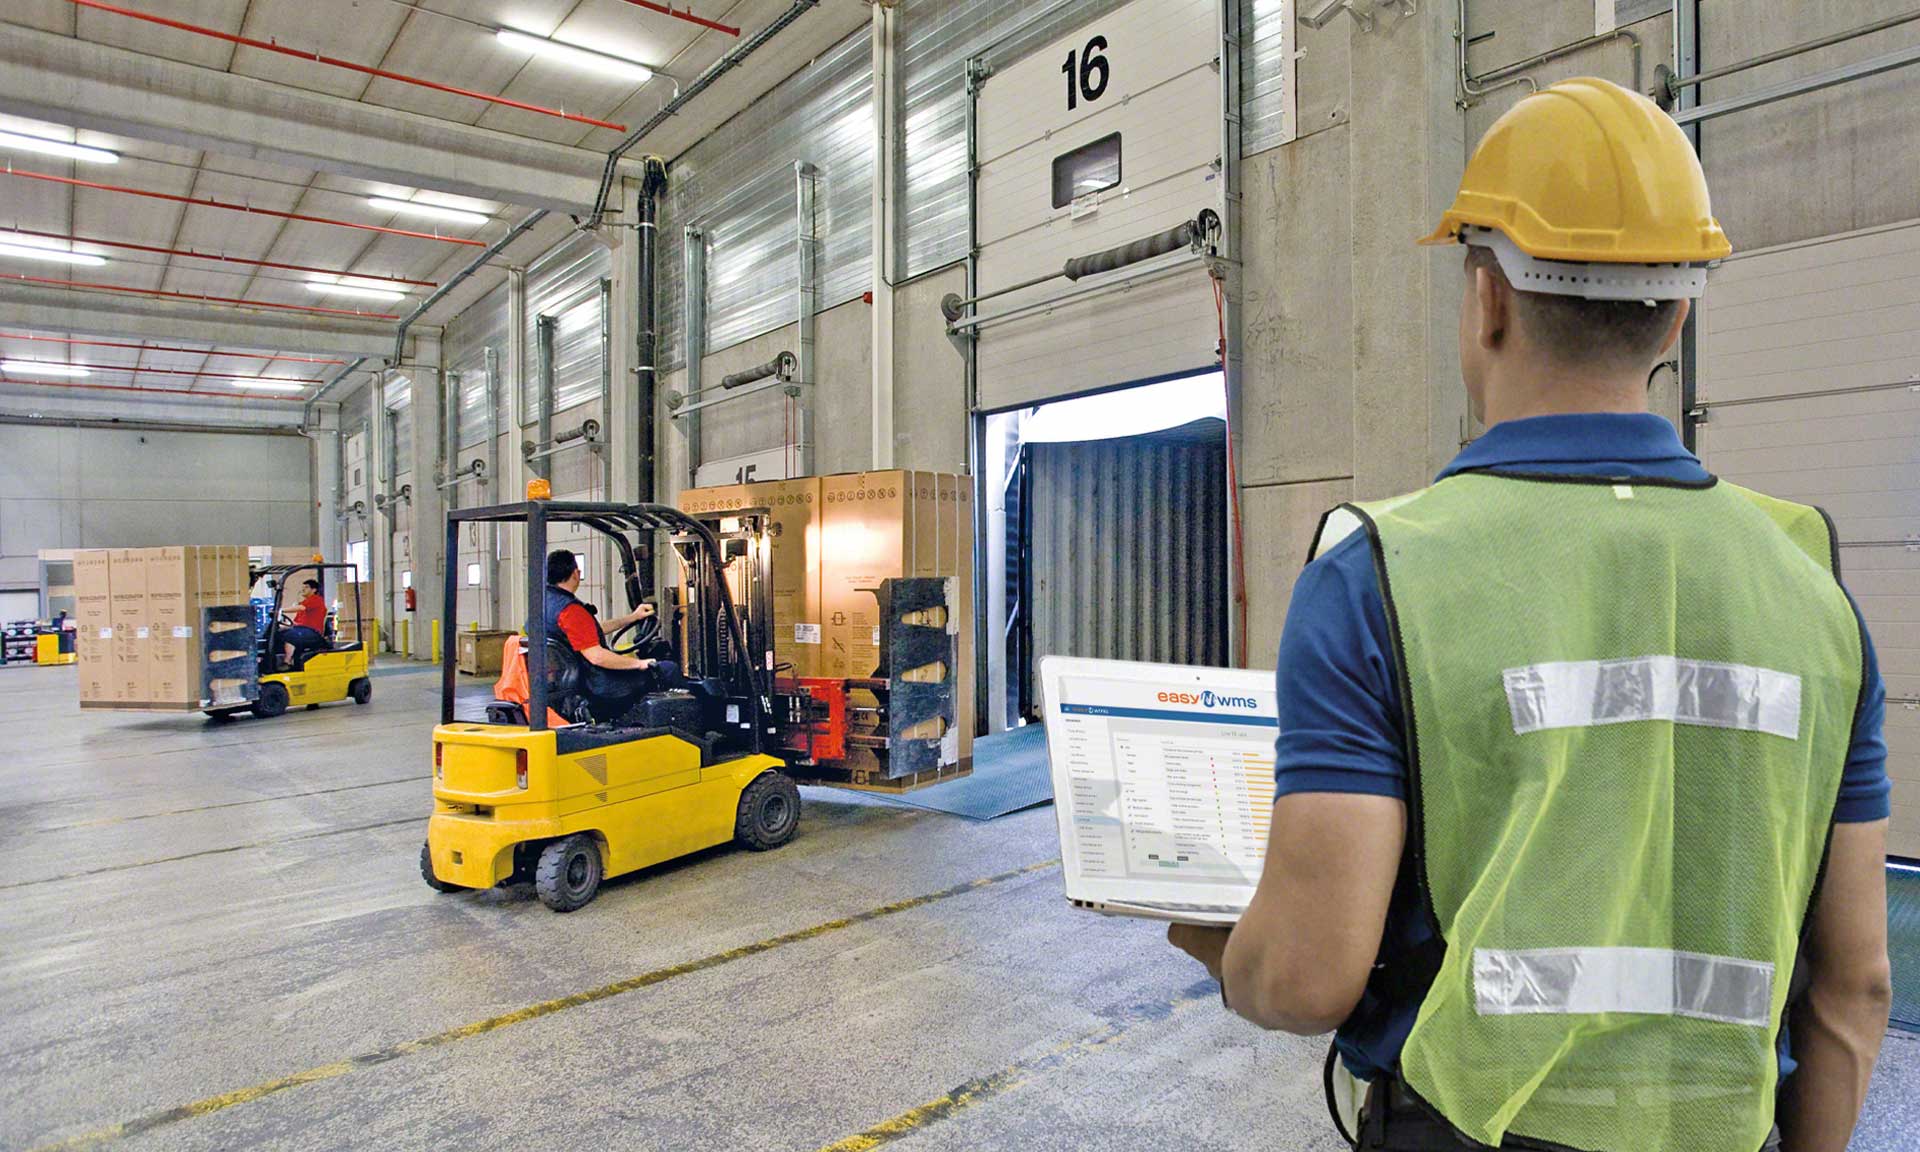 The 3PL provider will digitalise its four warehouses in France